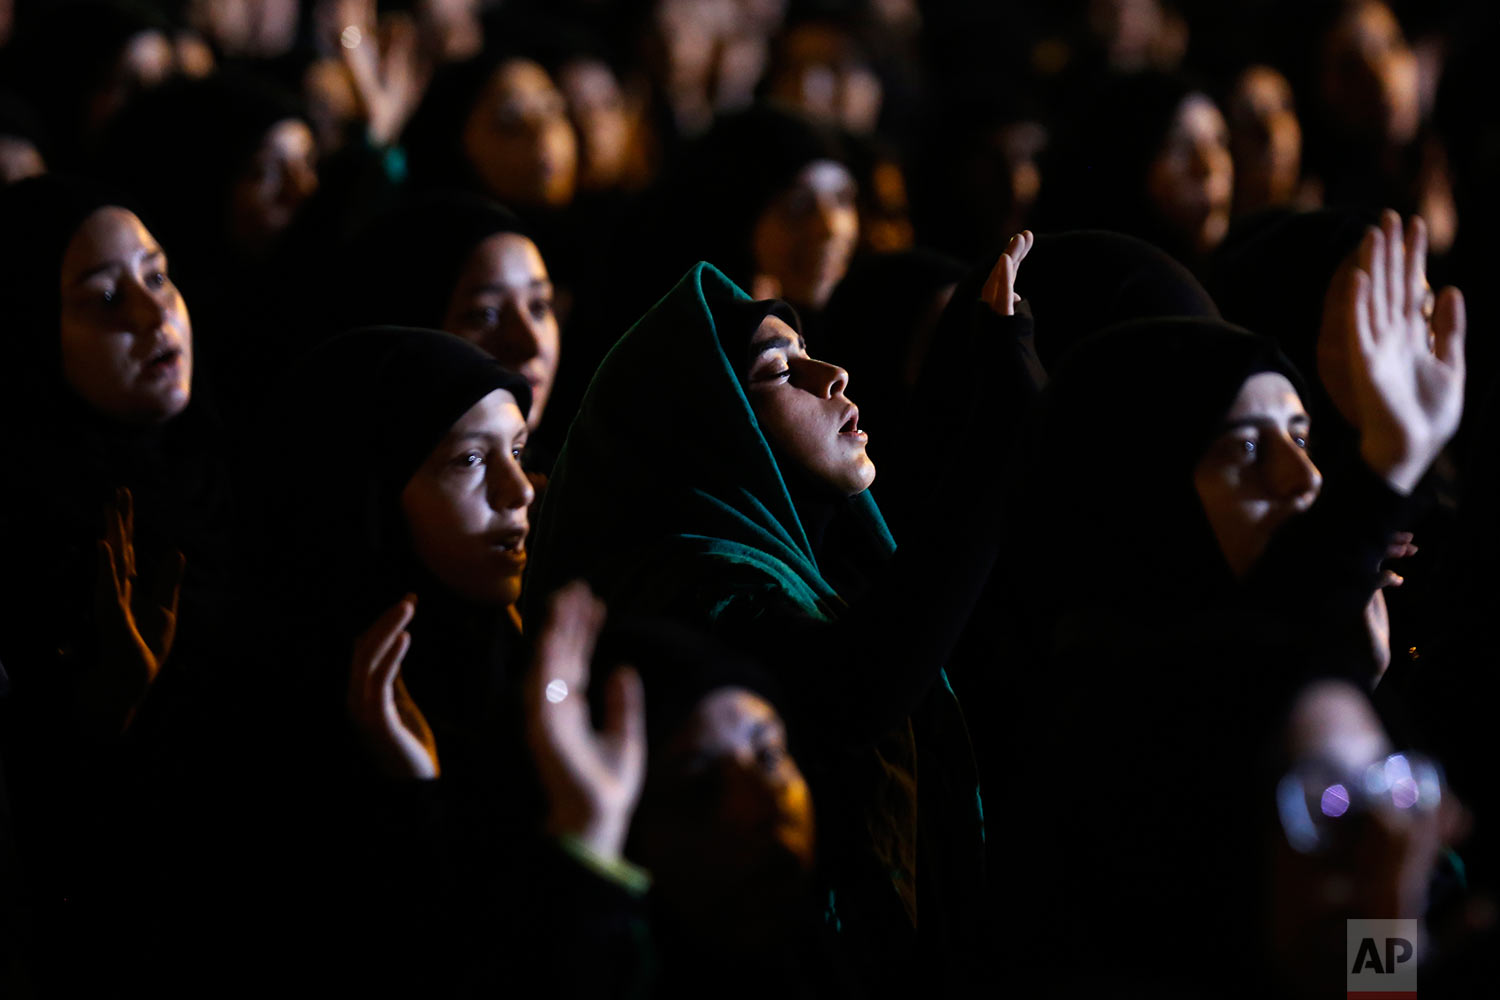  Hezbollah supporters listen to the story of Imam Hussein during activities to mark the ninth of Ashoura, a 10-day ritual commemorating the death of Imam Hussein, in a southern suburb of Beirut, Lebanon, Saturday, Sept. 30, 2017. (AP Photo/Hassan Amm